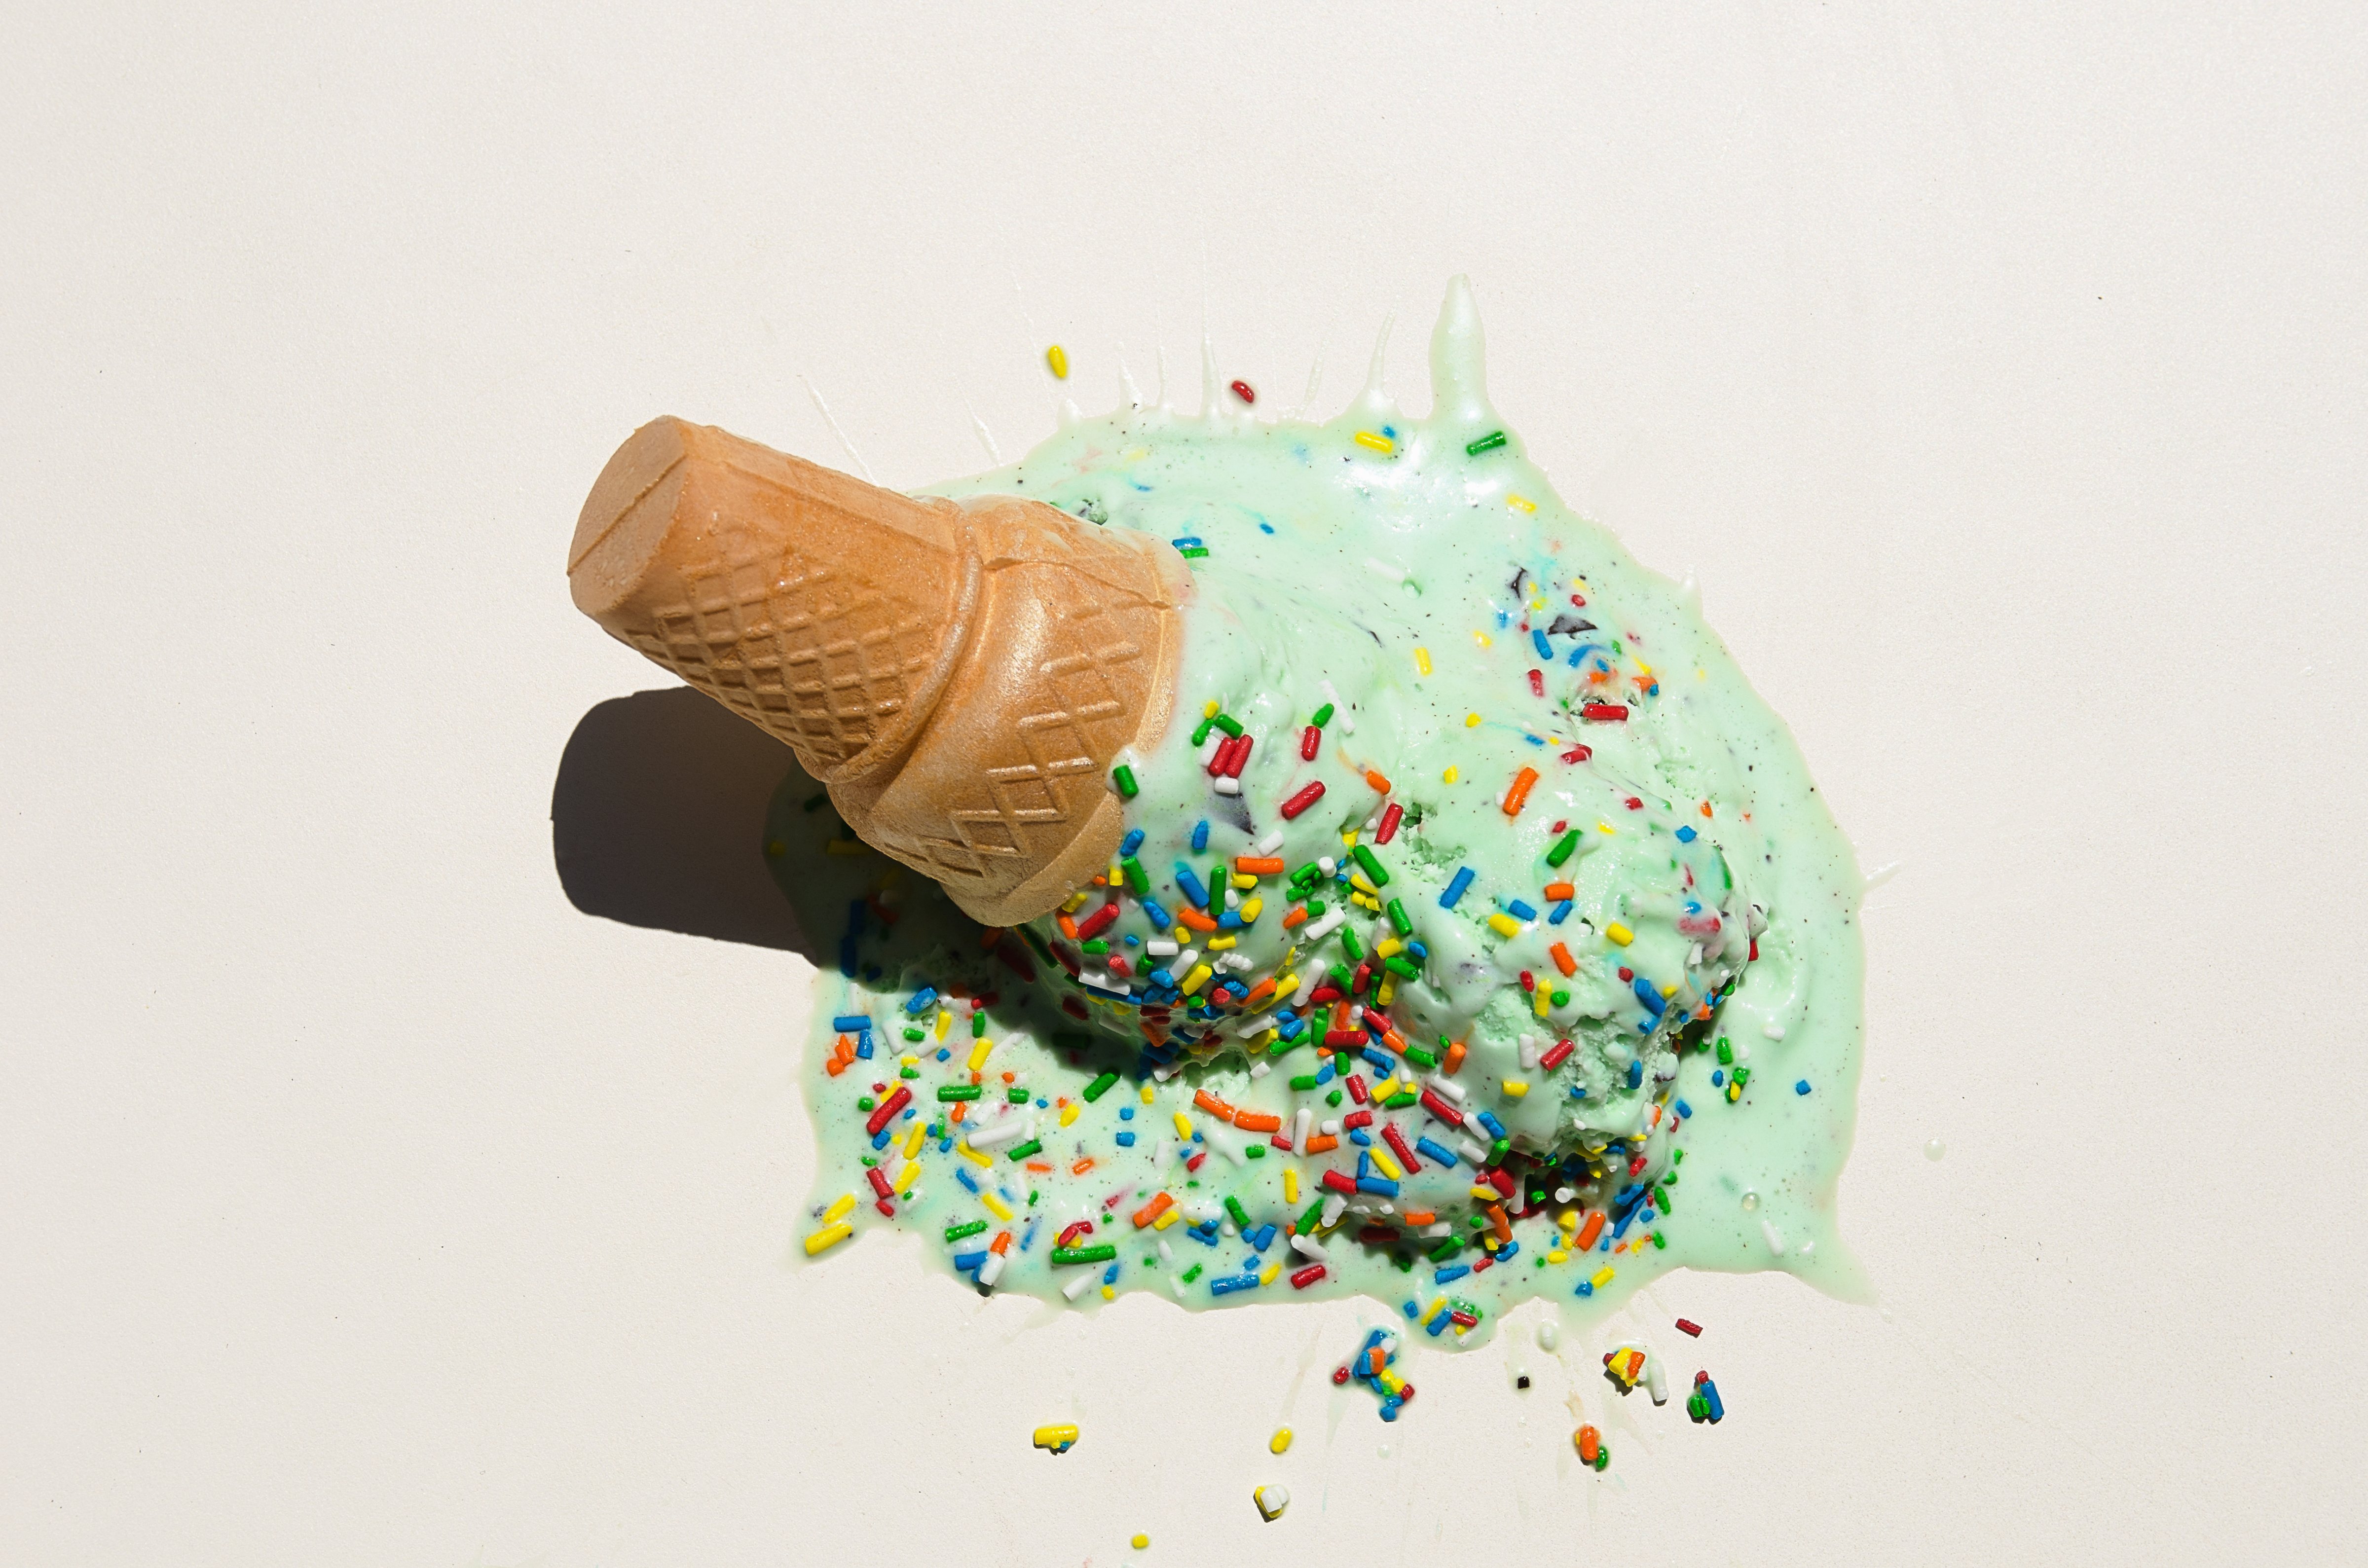 Ice cream cone smashed on white background (Getty Images)